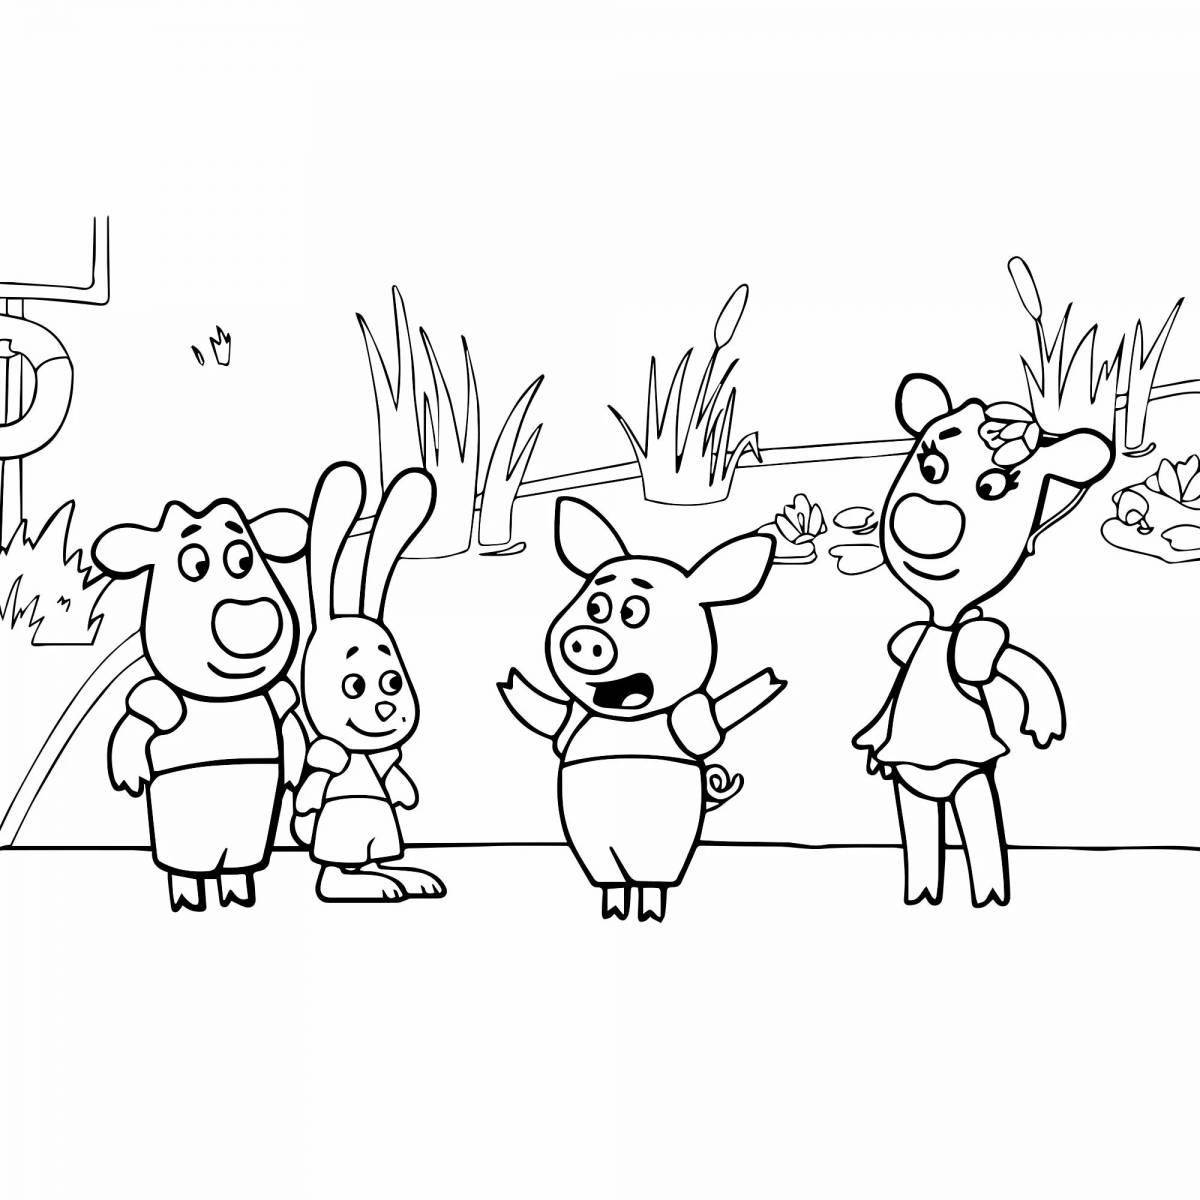 Creative cartoon characters coloring book for 3-4 year olds